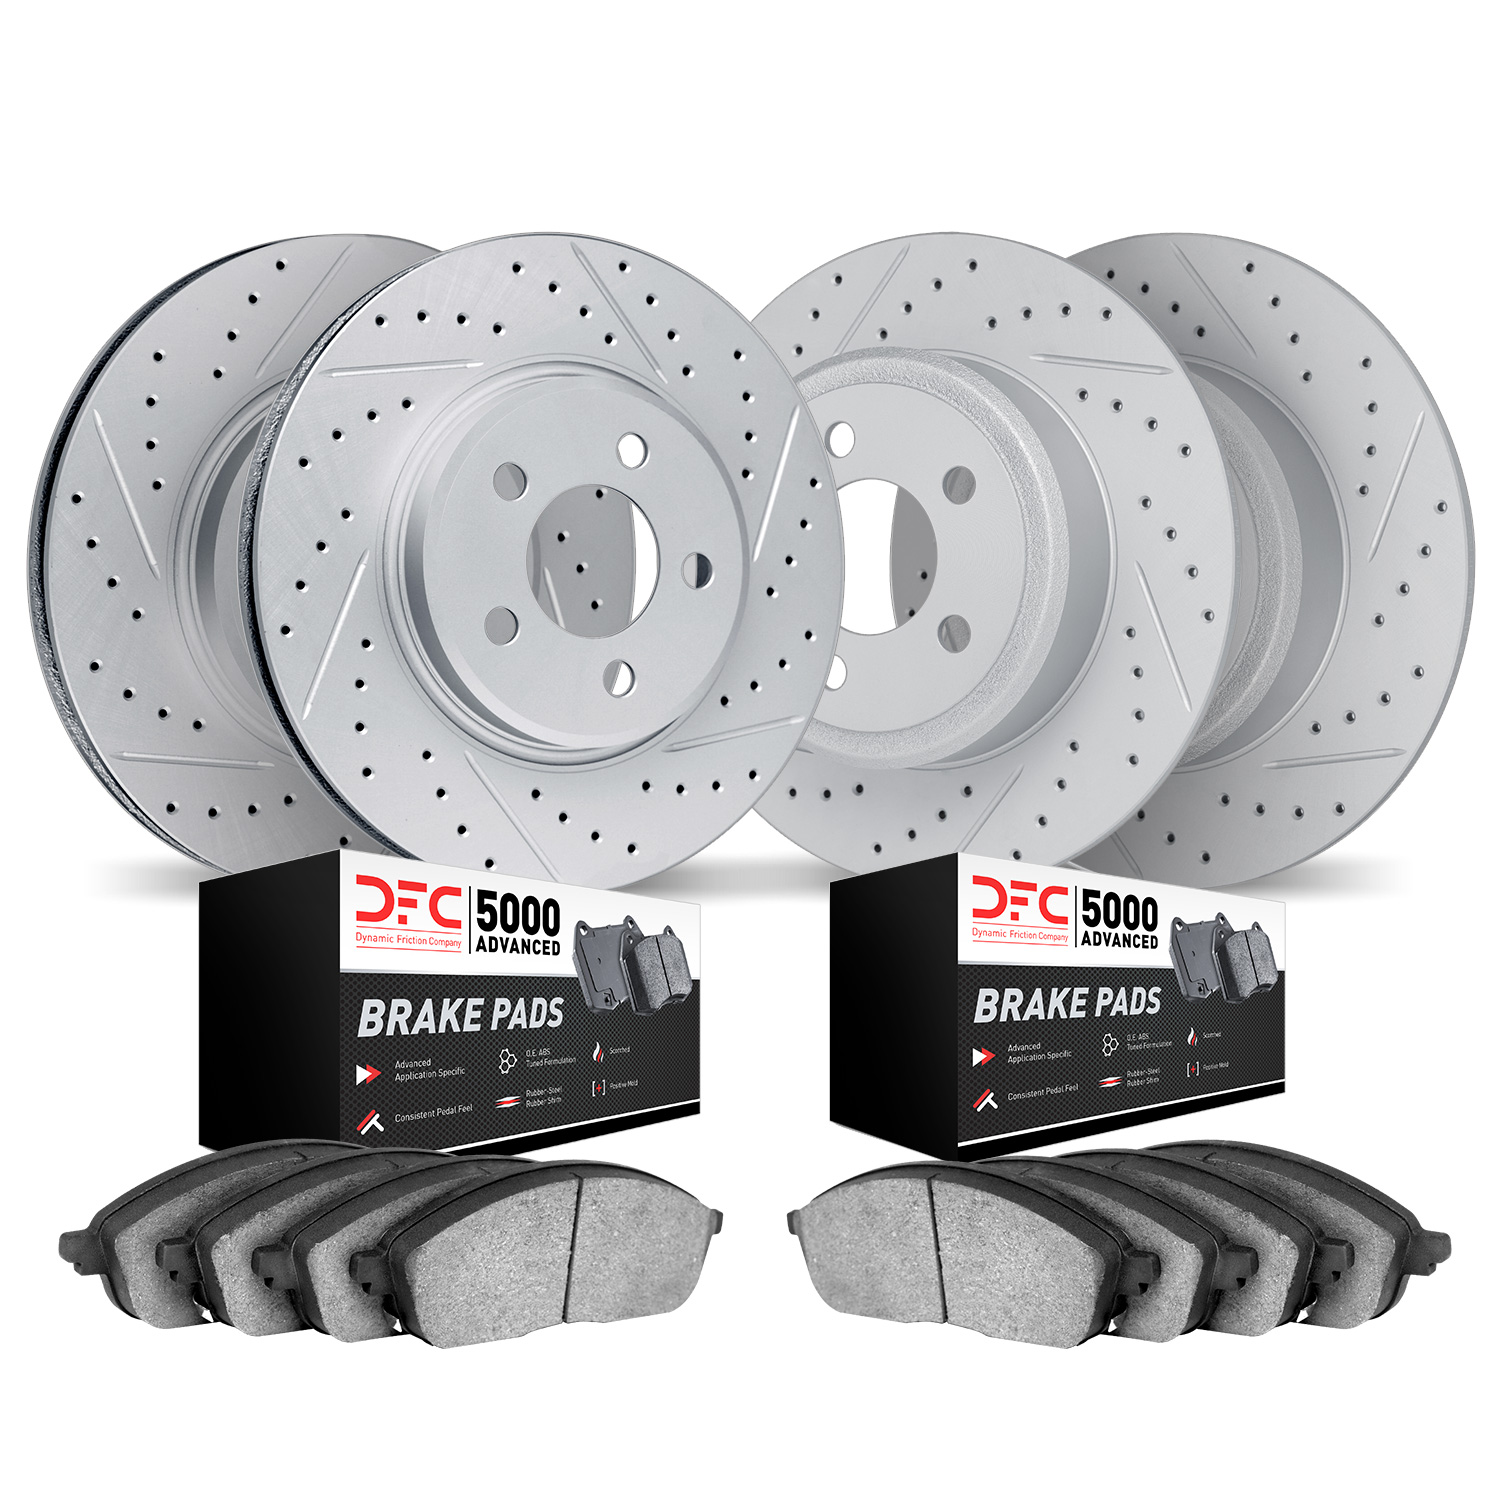 2504-32015 Geoperformance Drilled/Slotted Rotors w/5000 Advanced Brake Pads Kit, 2016-2019 Mini, Position: Front and Rear